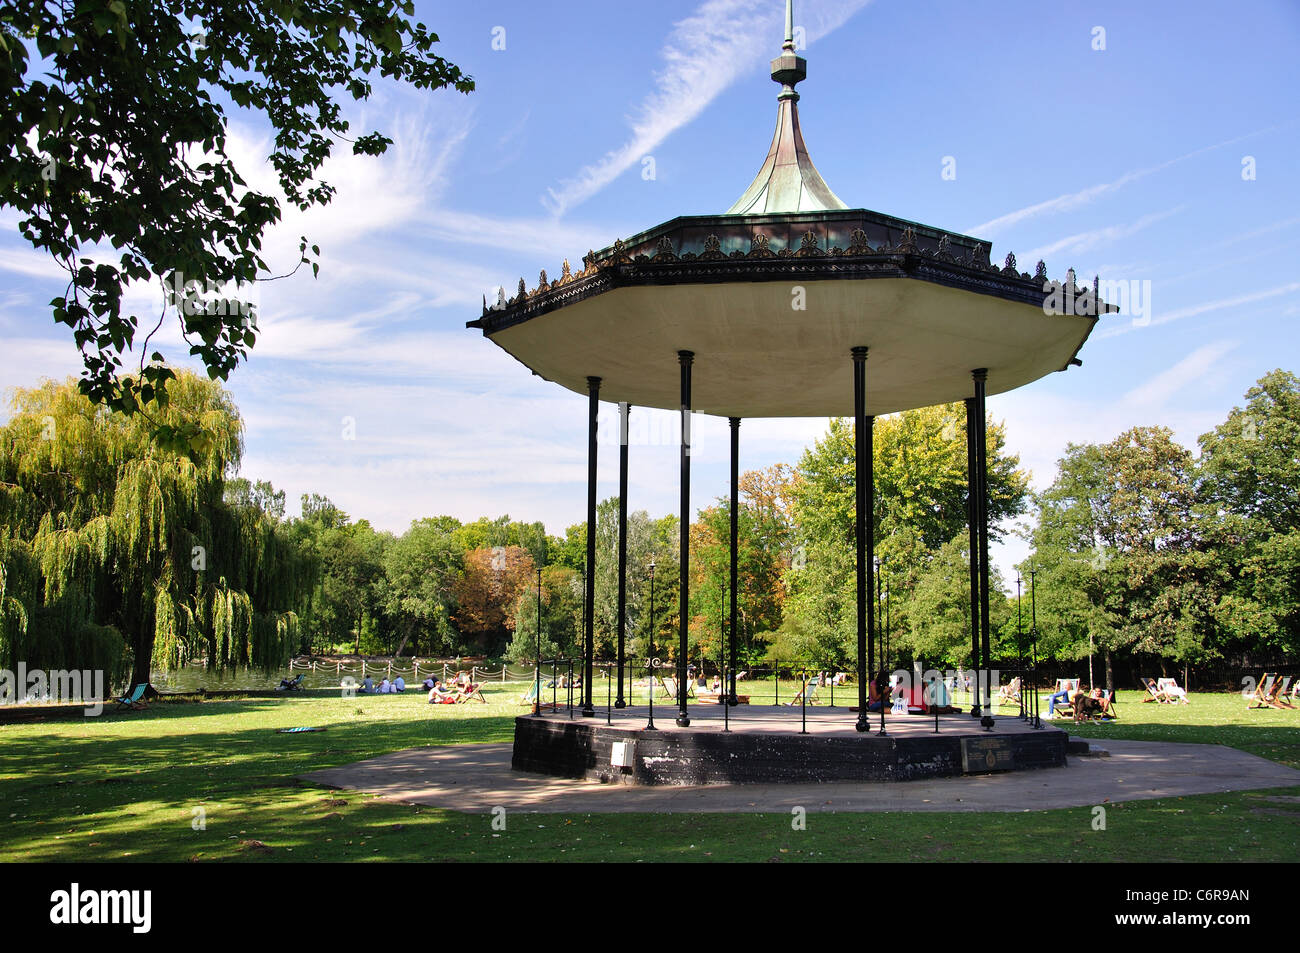 Bandstand by Boating Lake, Regent's Park, City of Westminster, London, Greater London, England, United Kingdom Stock Photo